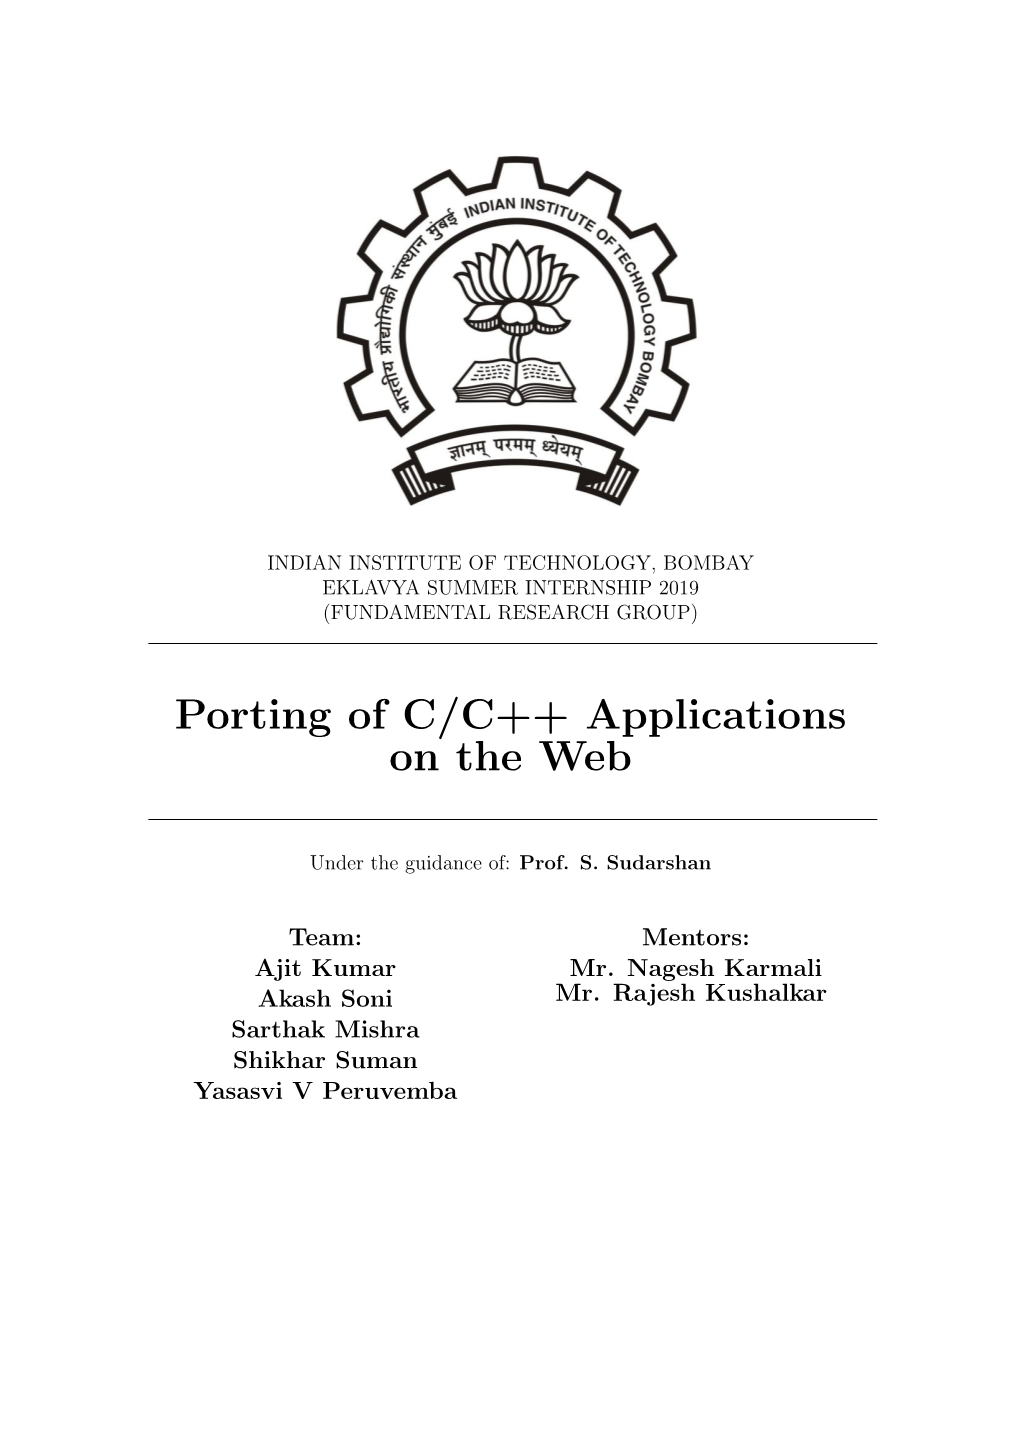 Porting of C/C++ Applications on the Web